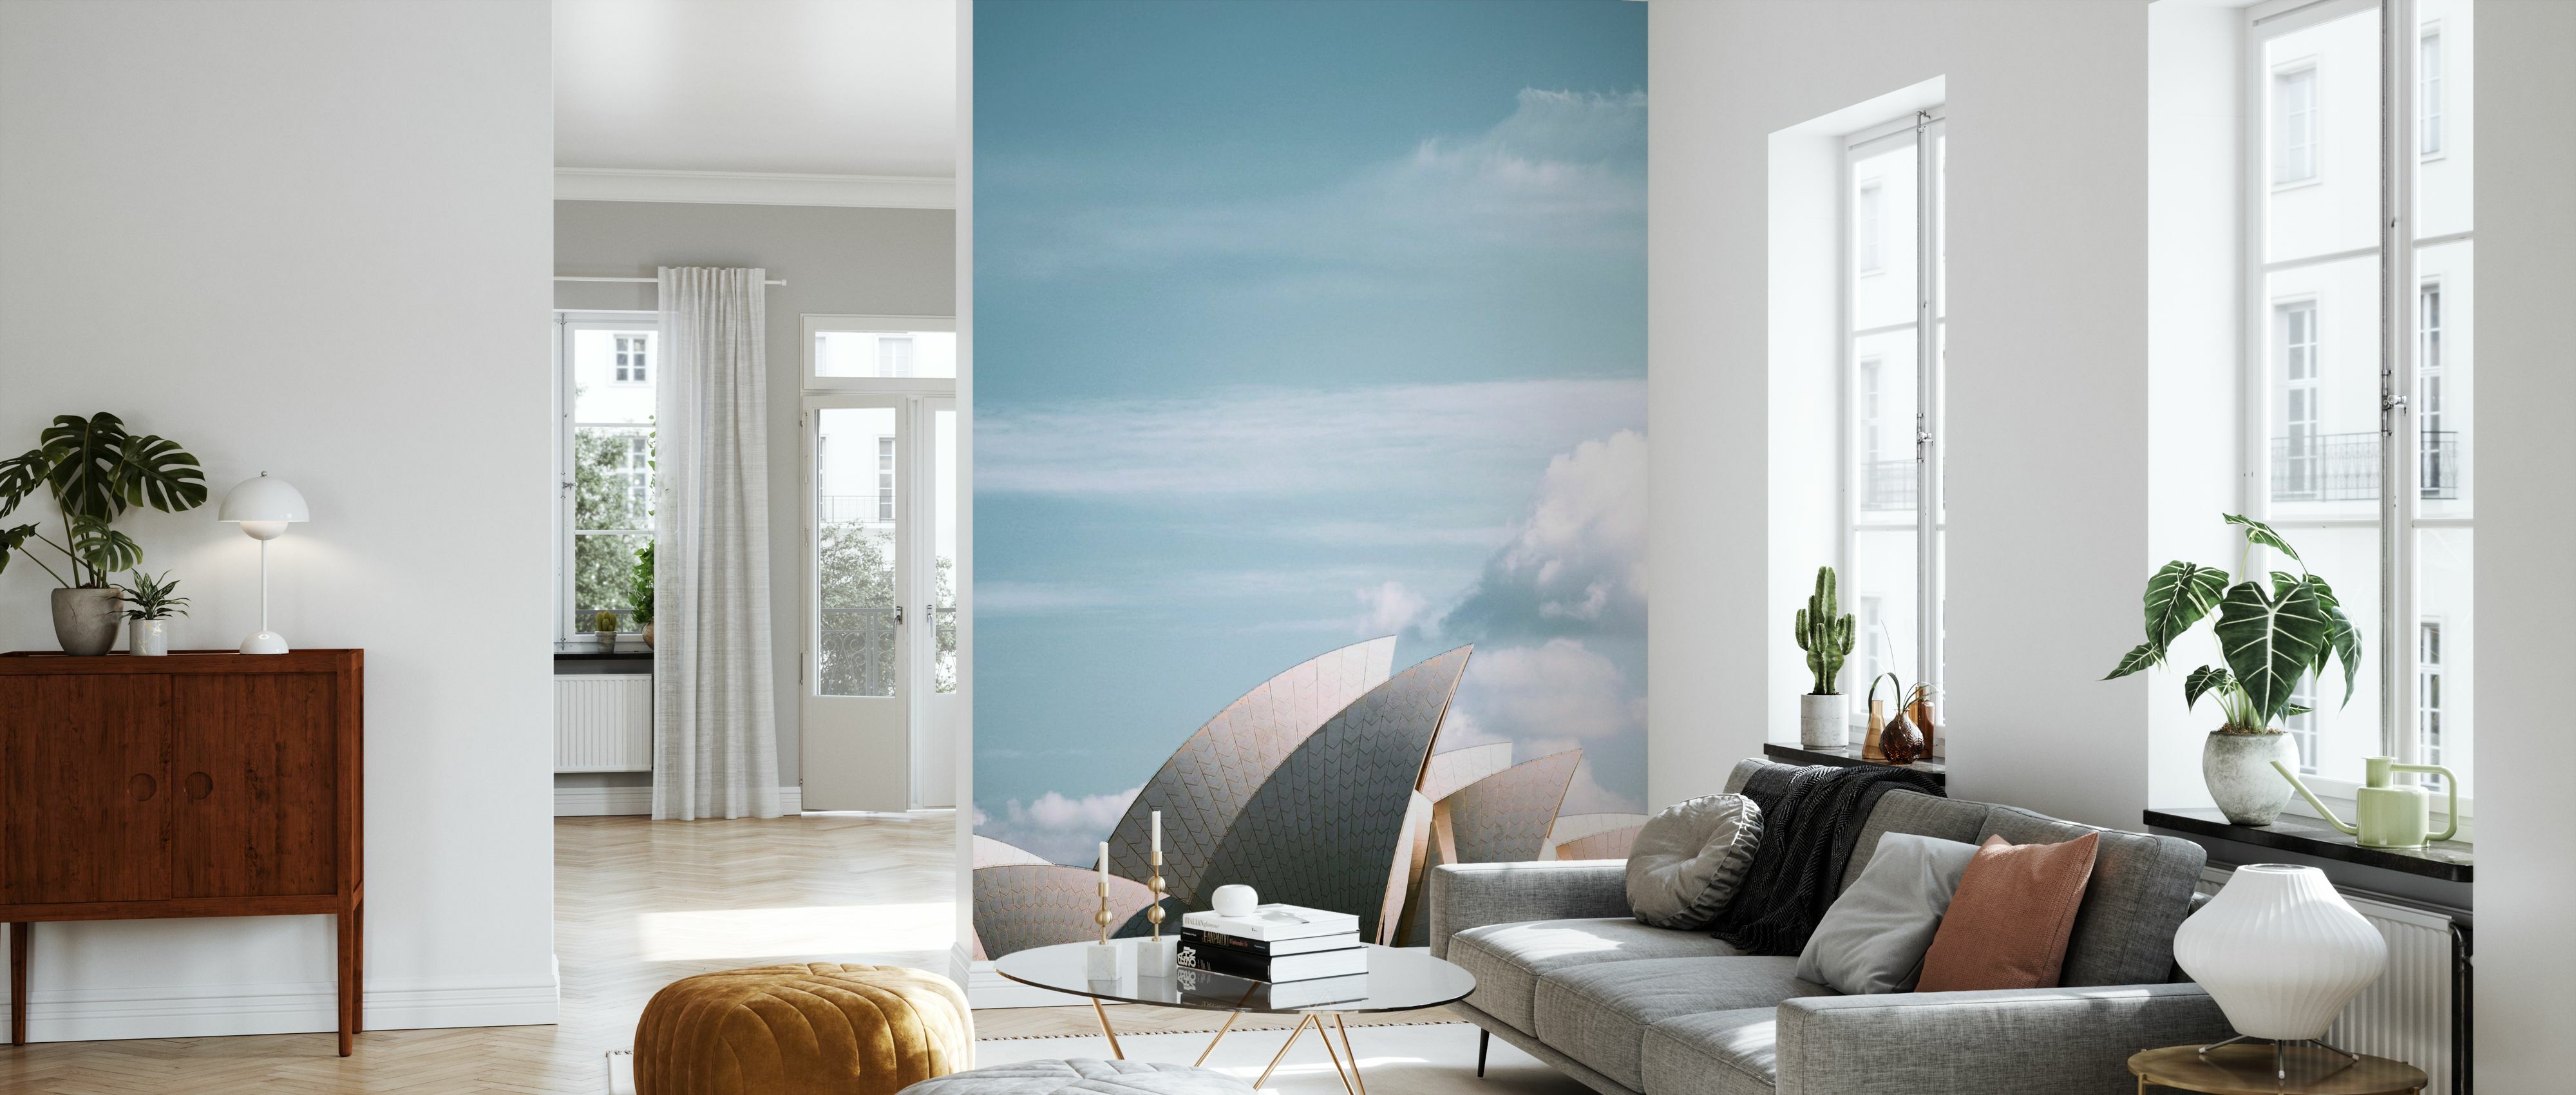 Sydney Opera House Photo Wall Mural Wallpaper Wall Decor Sticker Picture 1055 